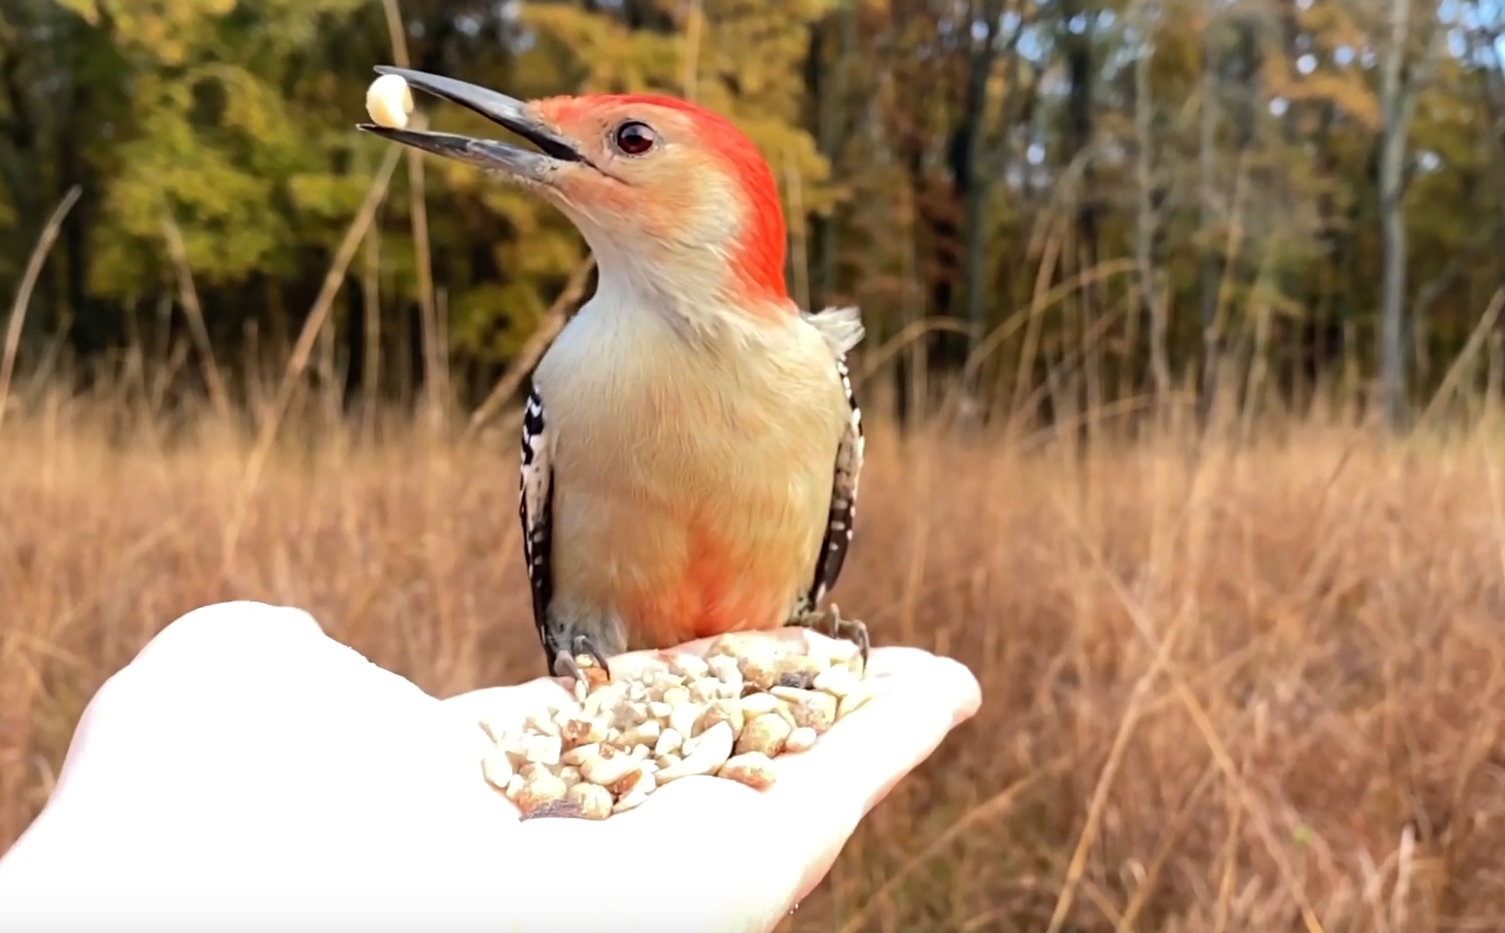 Feeding Black-capped Chickadees, Red-bellied Woodpecker